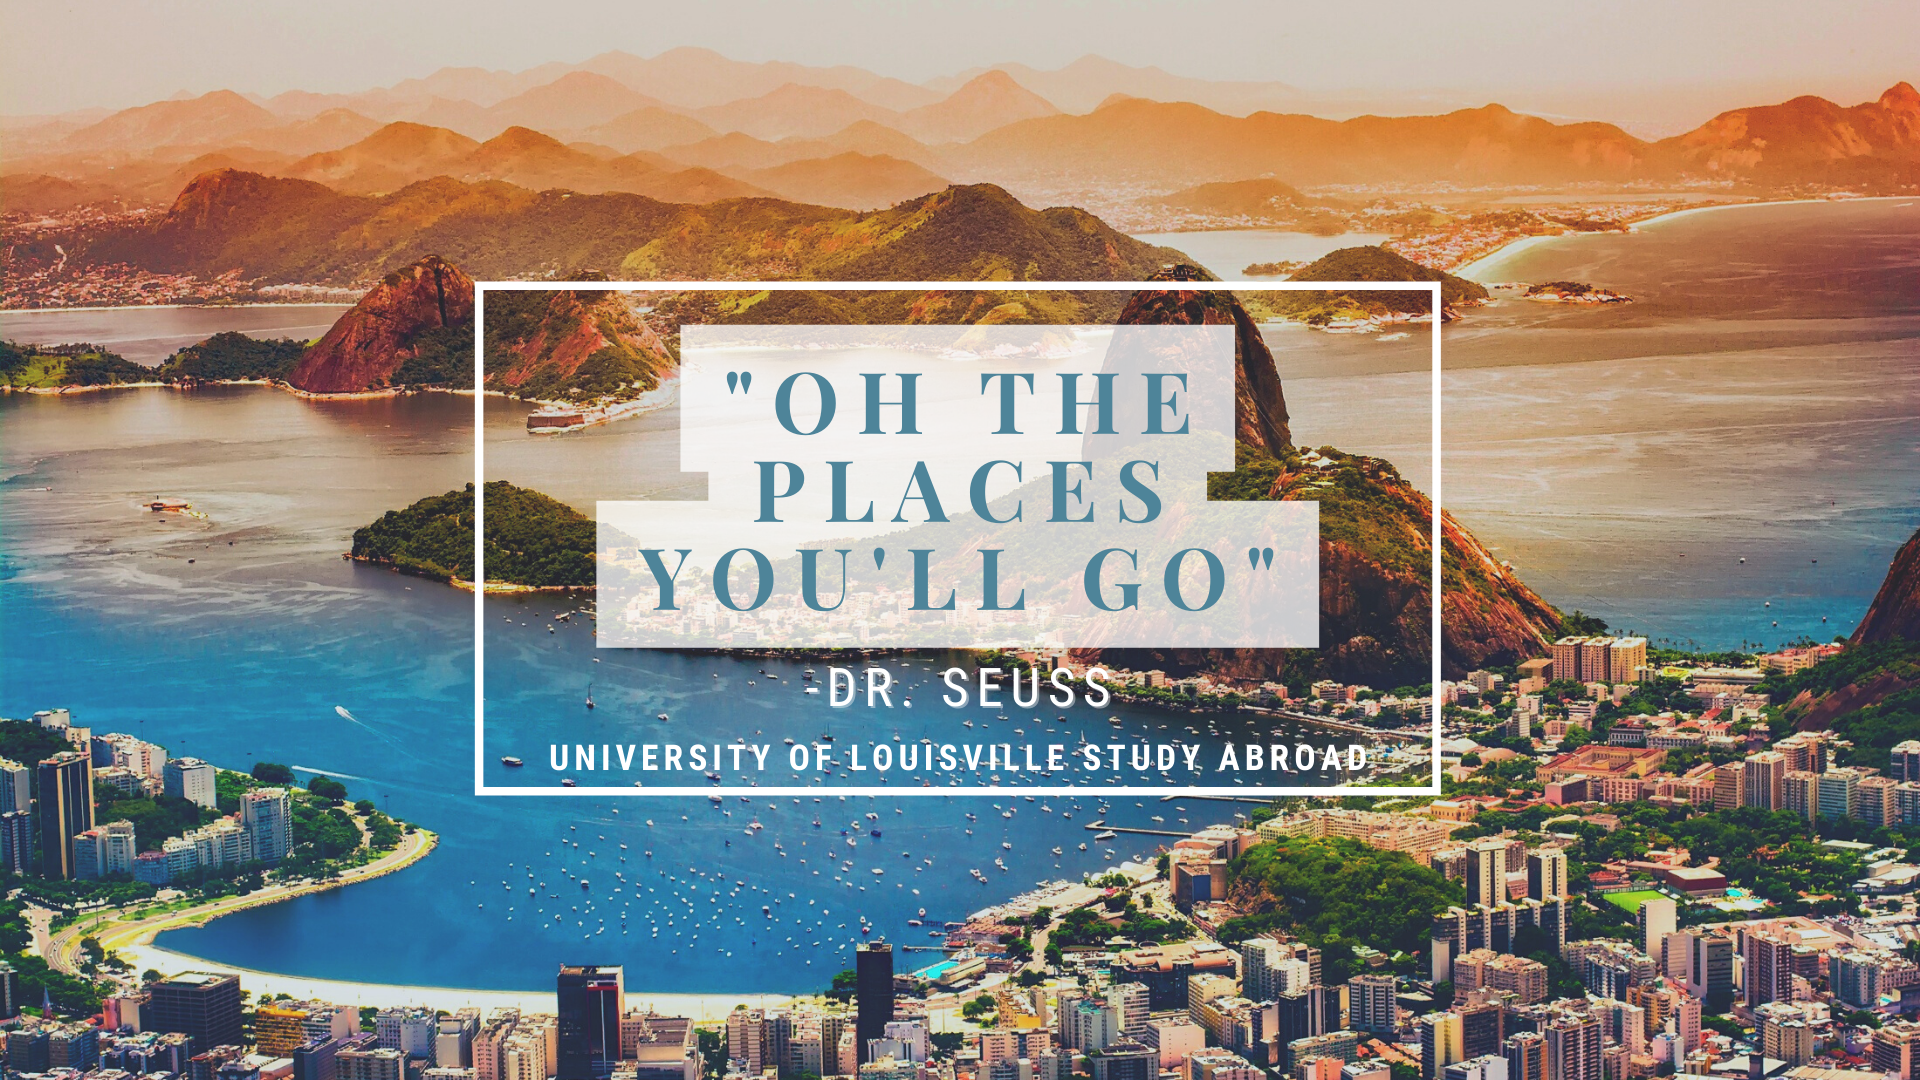 'Oh the places you'll go,' Dr. Seuss. University of Louisville Study Abroad